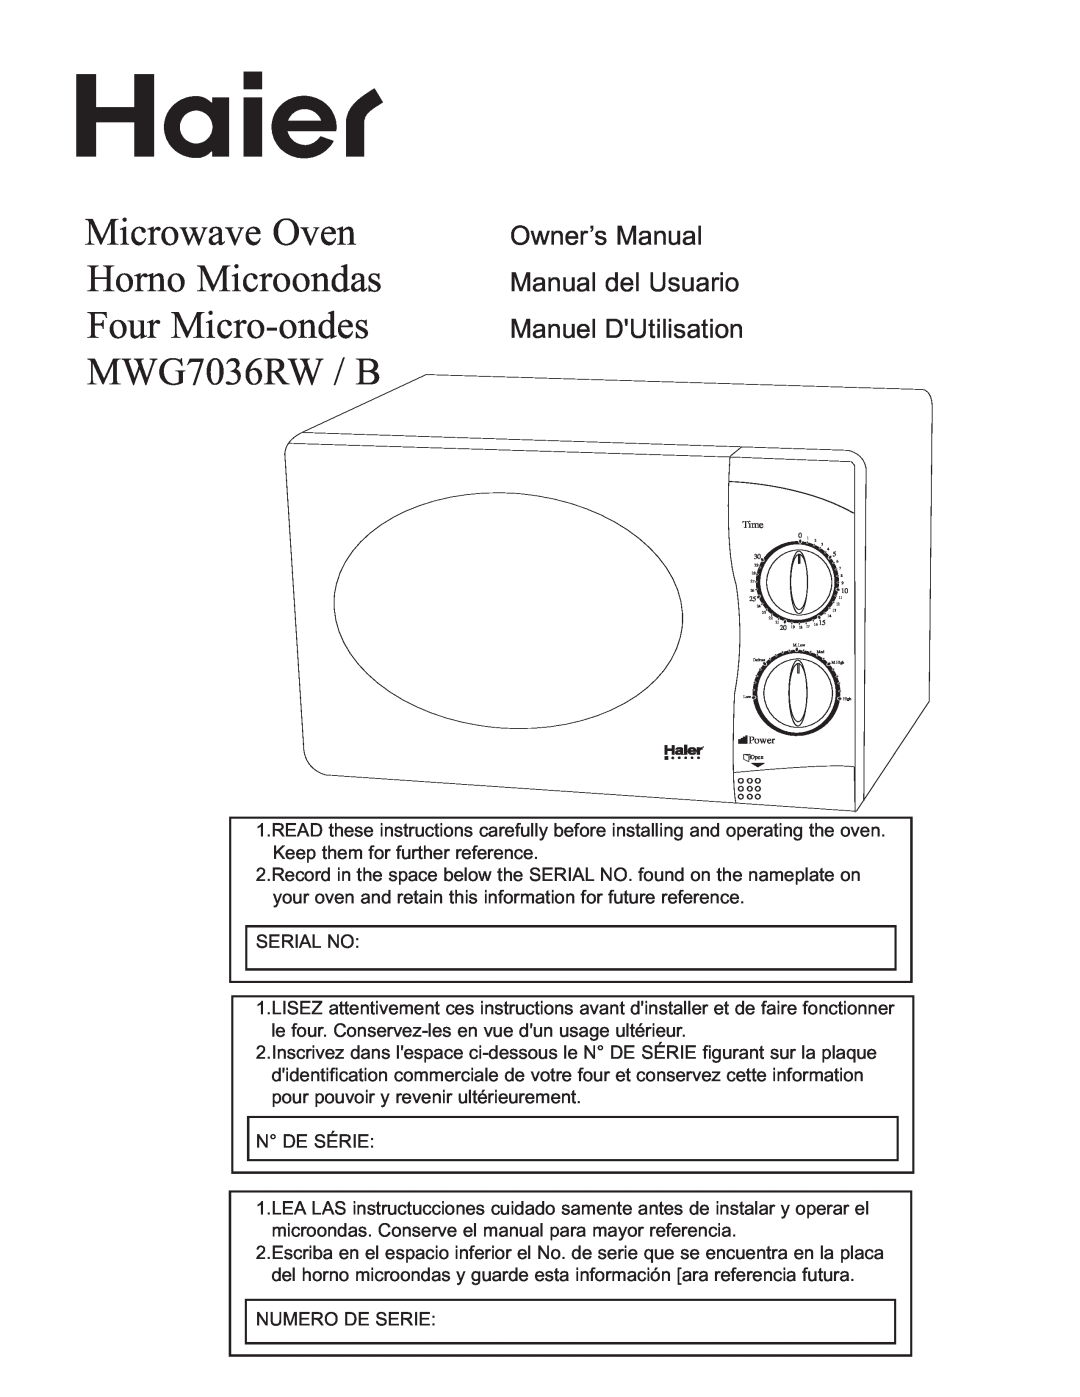 Haier MWG7036RW/B owner manual Microwave Oven Horno Microondas Four Micro-ondes MWG7036RW / B 